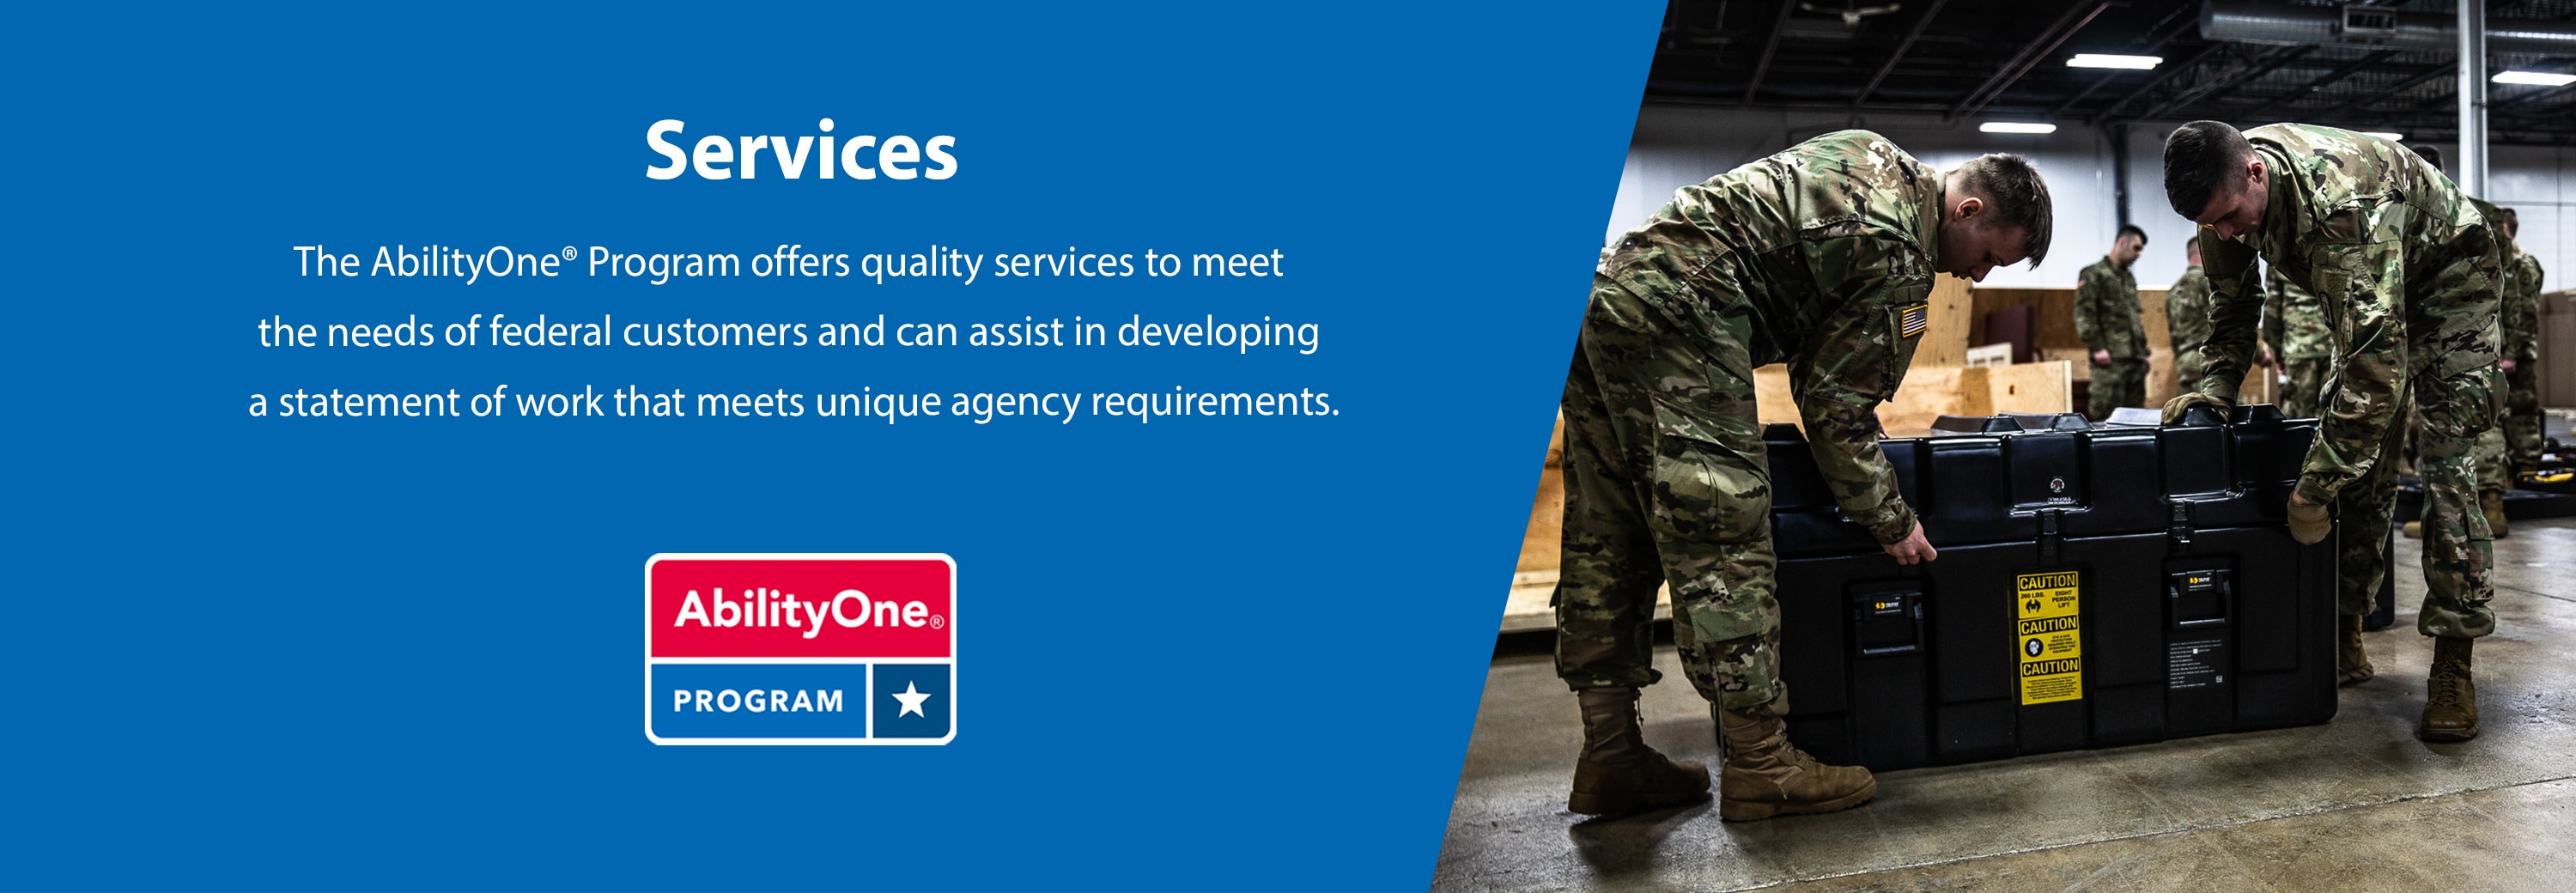 Services - The AbilityOne Program offers quality services to meet the needs of federal